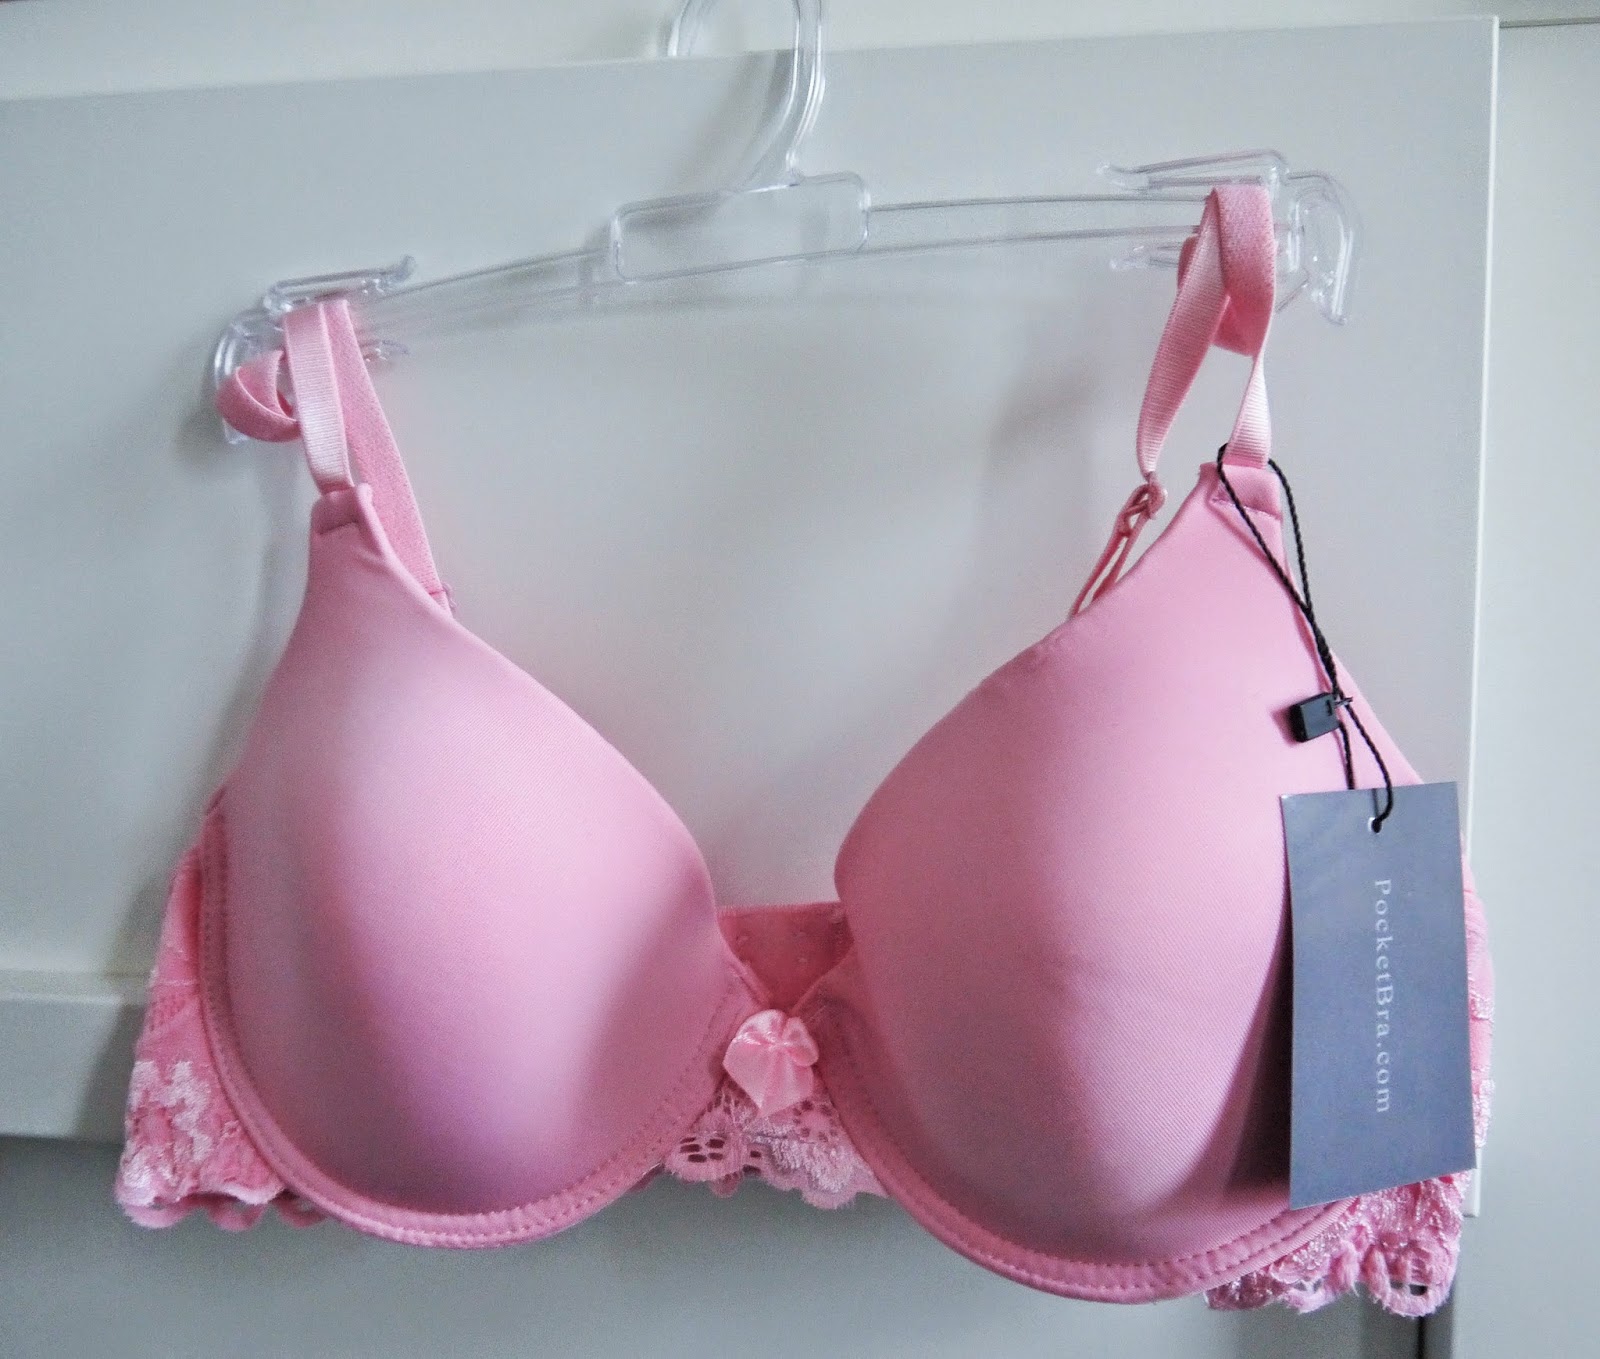 Product Review by Smilingrid! – PocketBra®